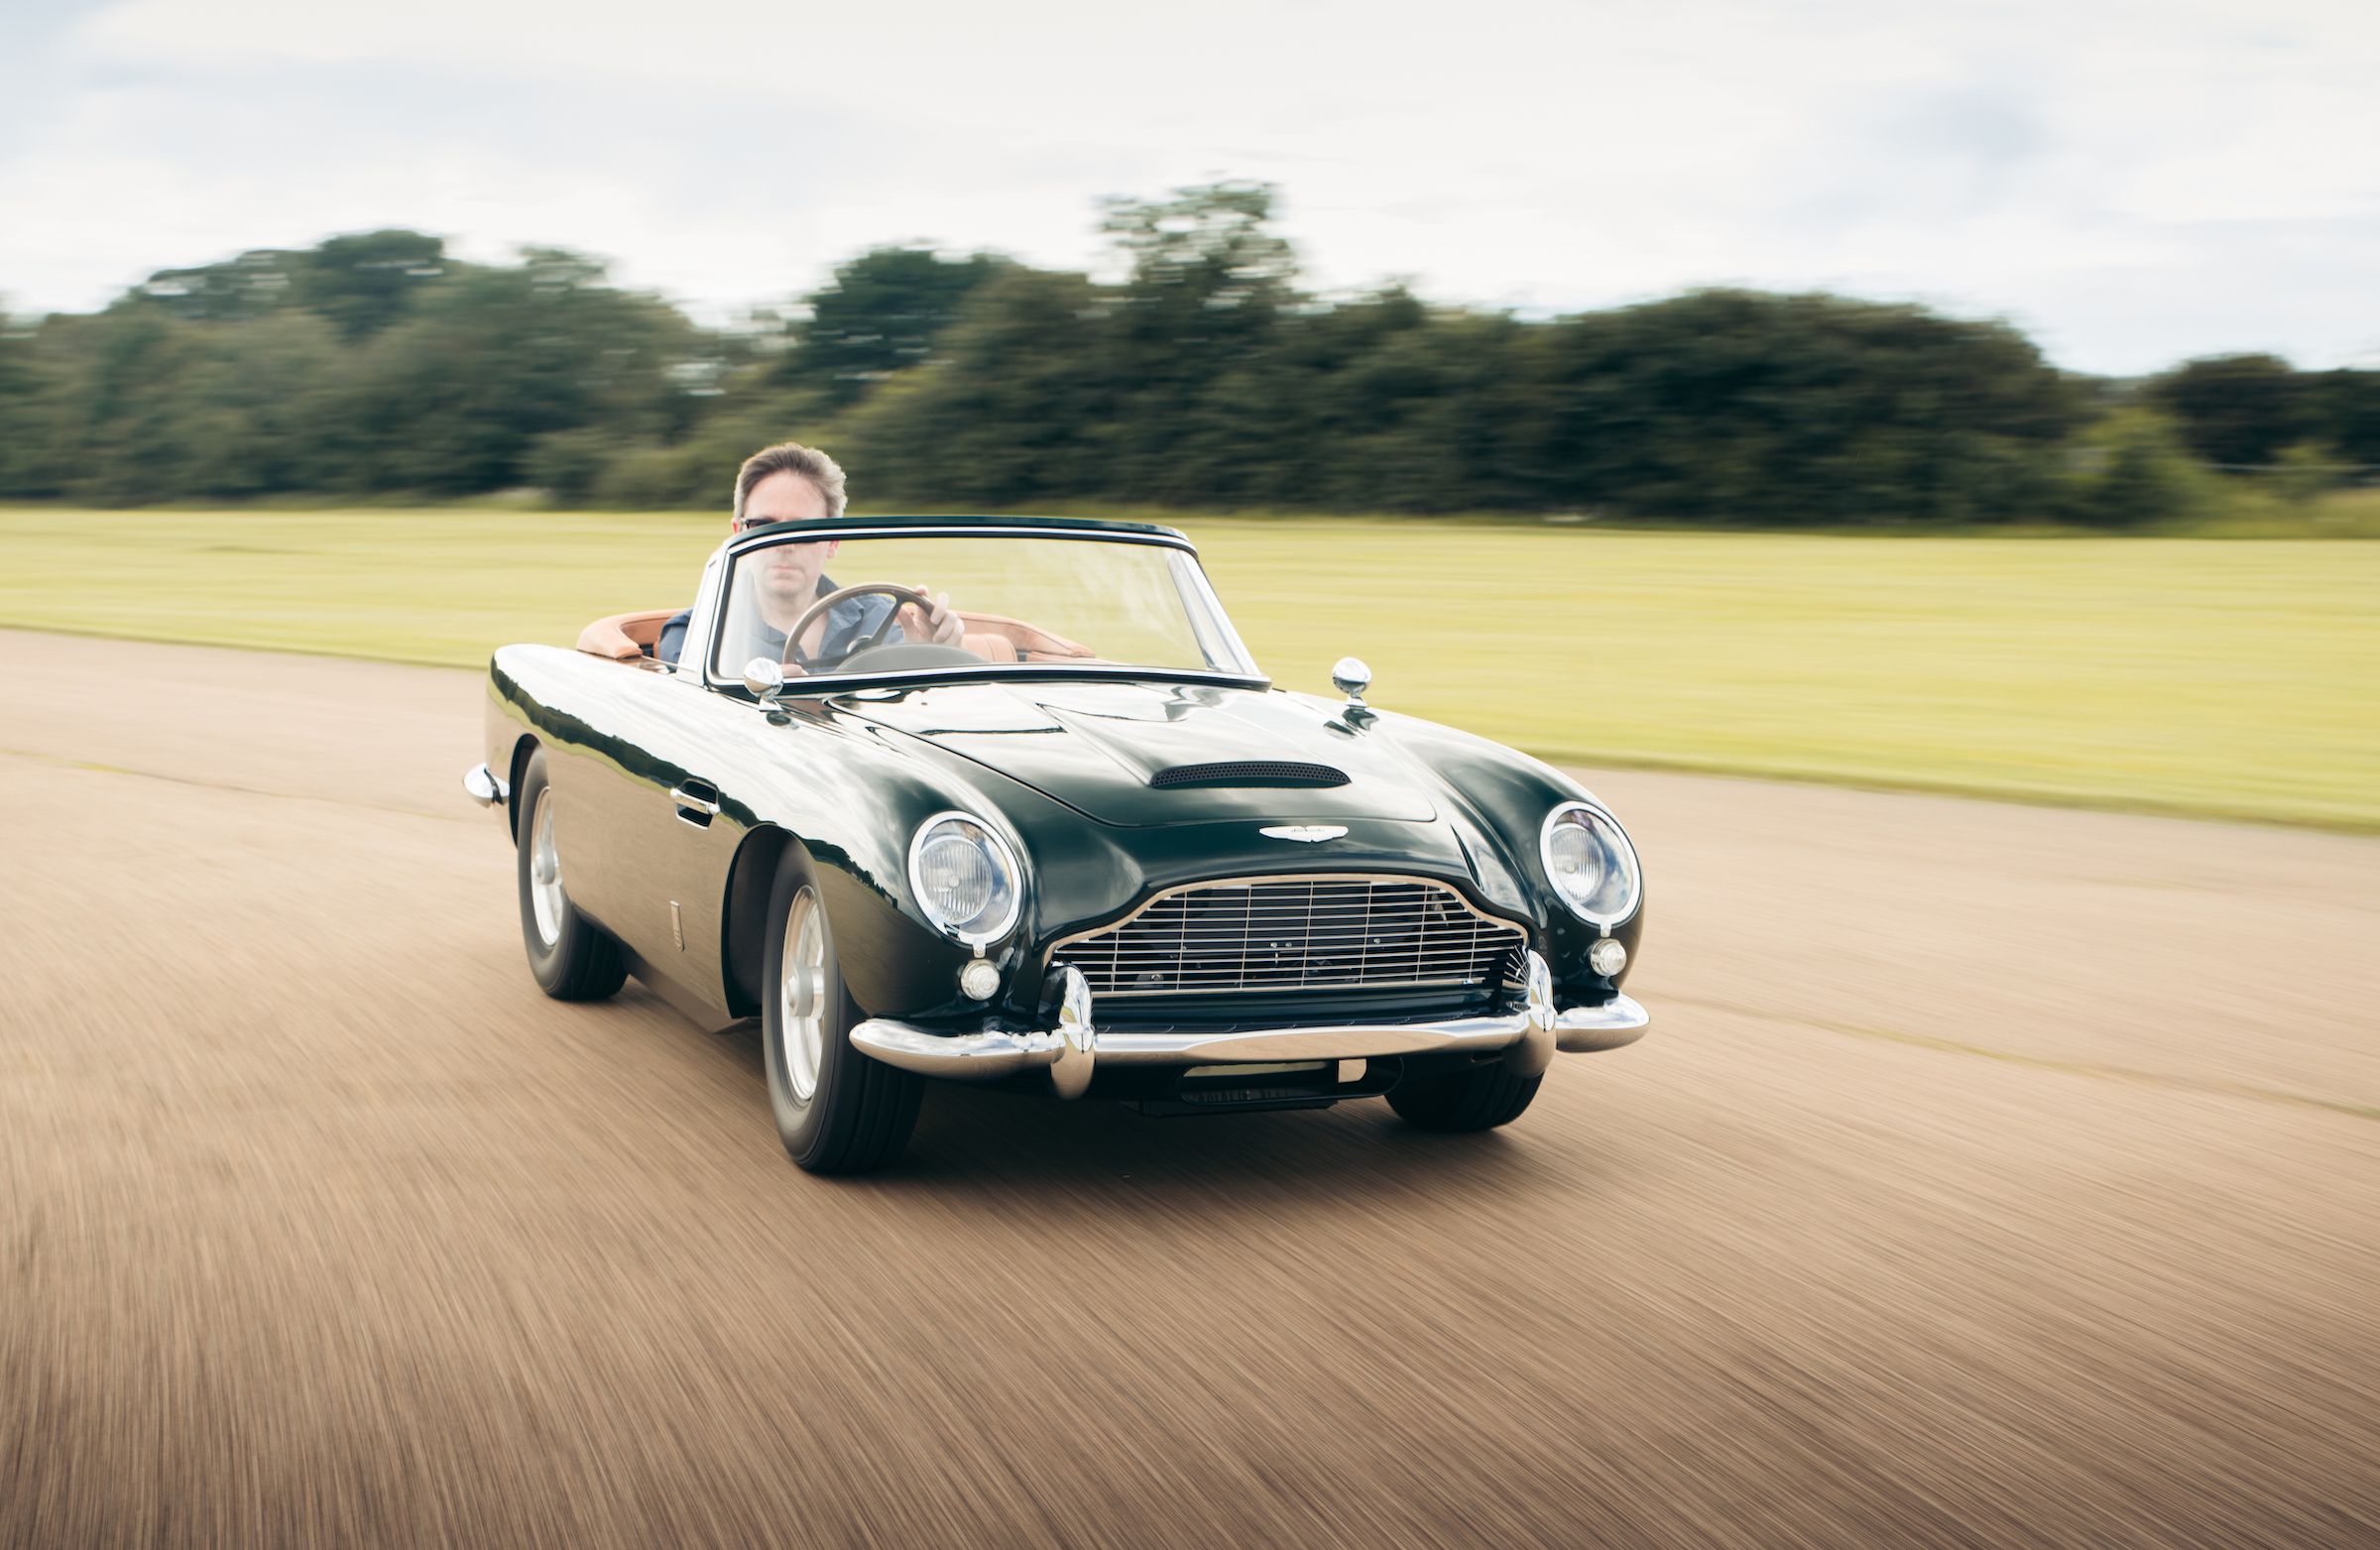 Baby you can drive my car: Flat-out and fearless in Little Car Company's Aston Martin DB5 Junior